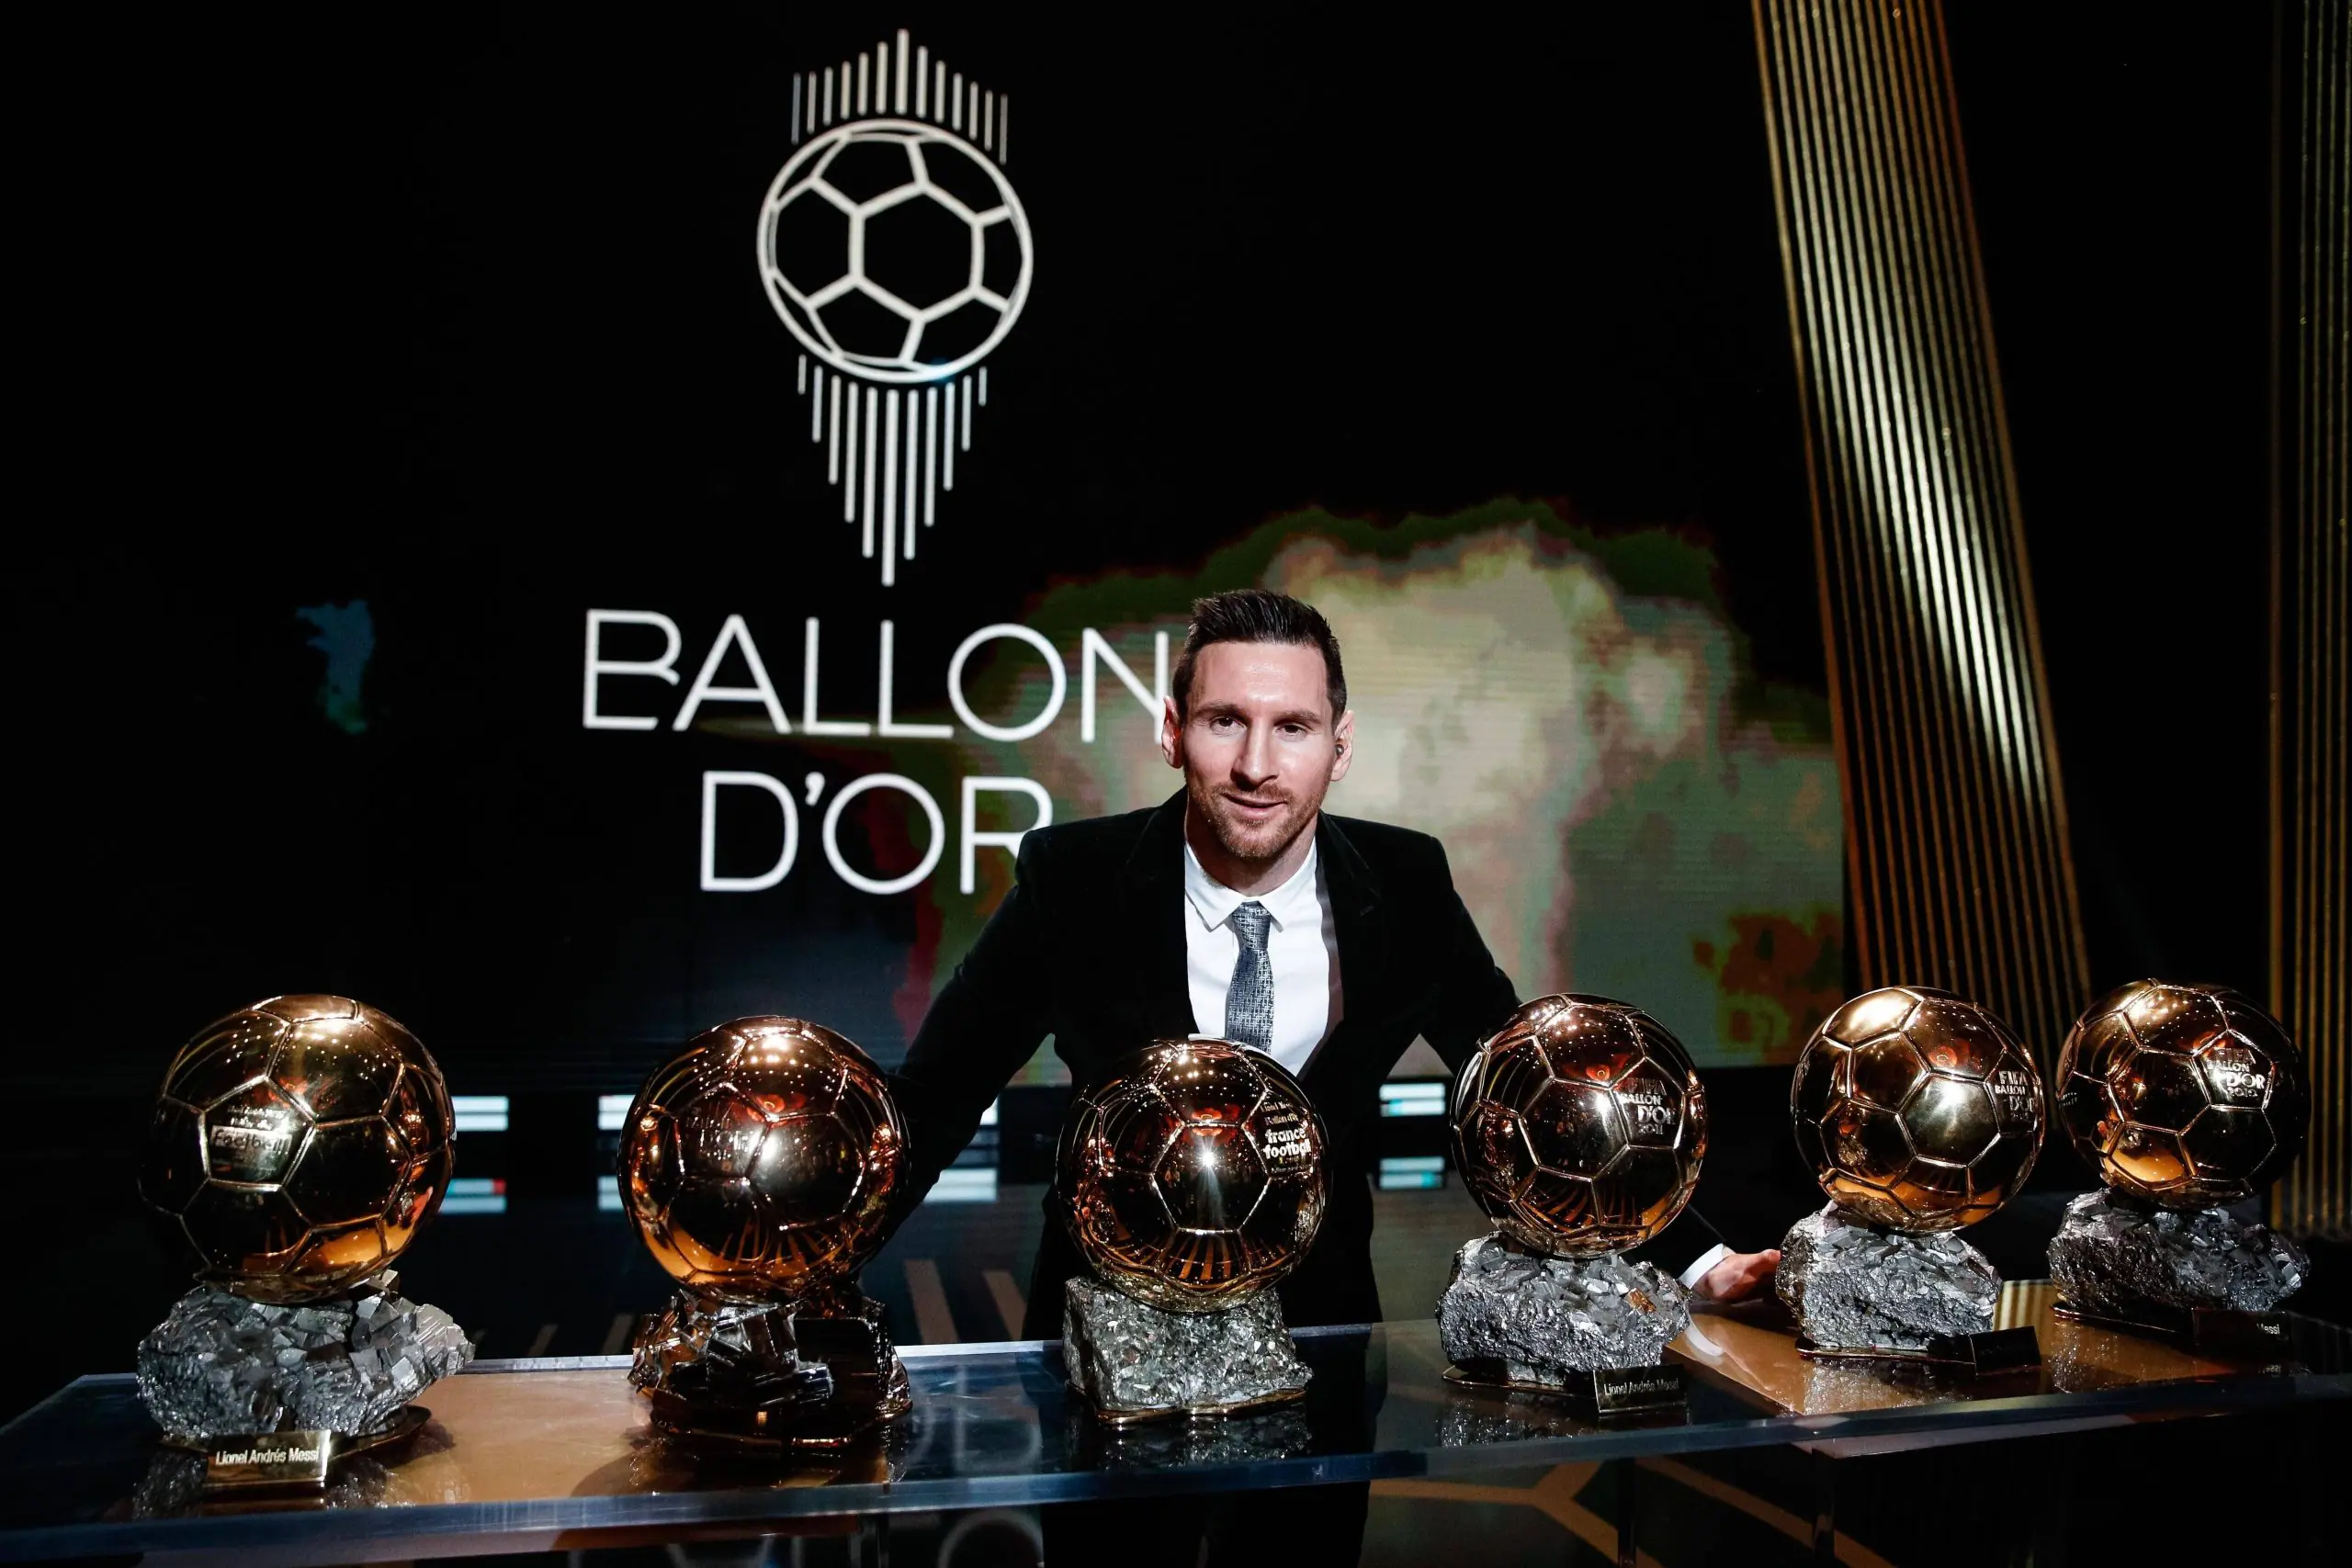 Lionel Messi Posing With His Ballons d'Or